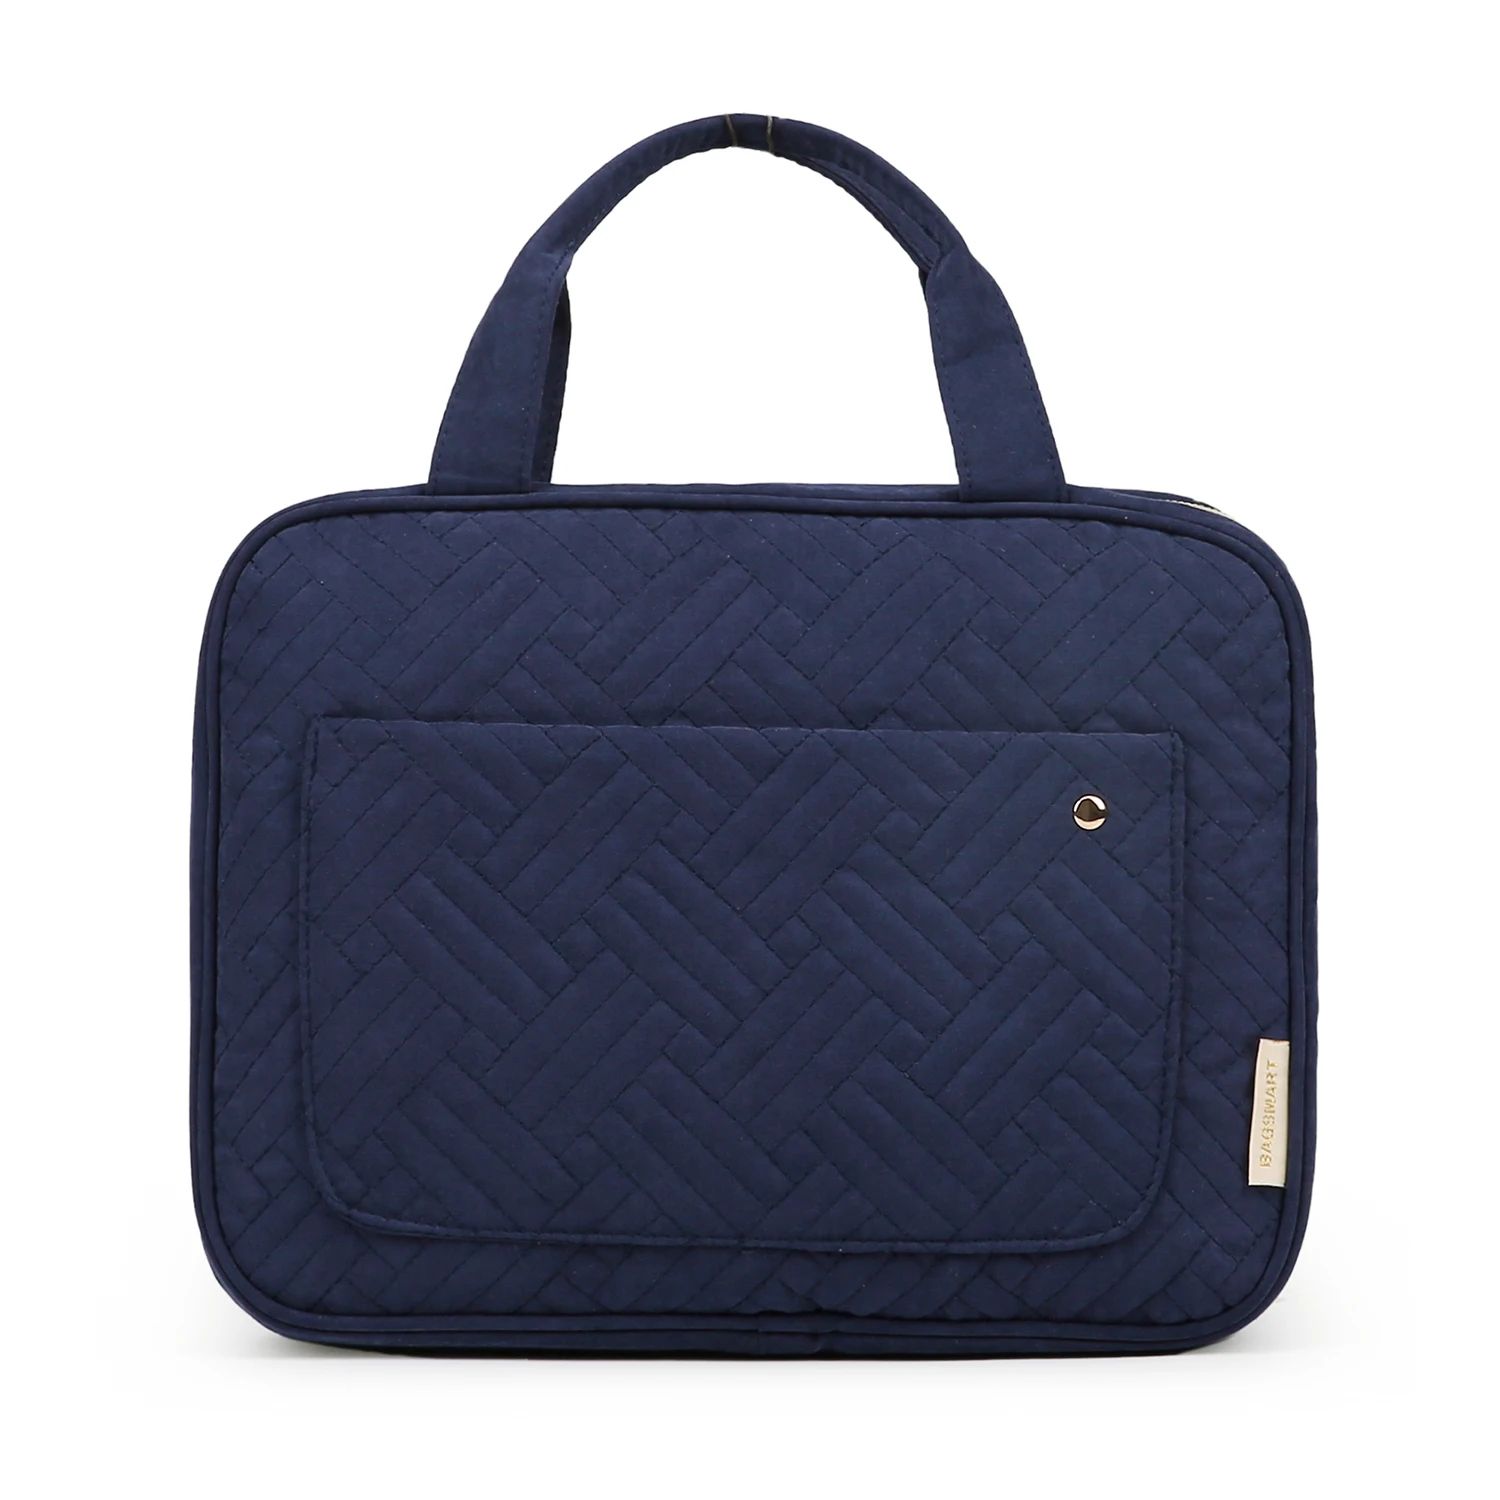 Grootte: 32L 10W 23H CMCOLOR: DBLUE